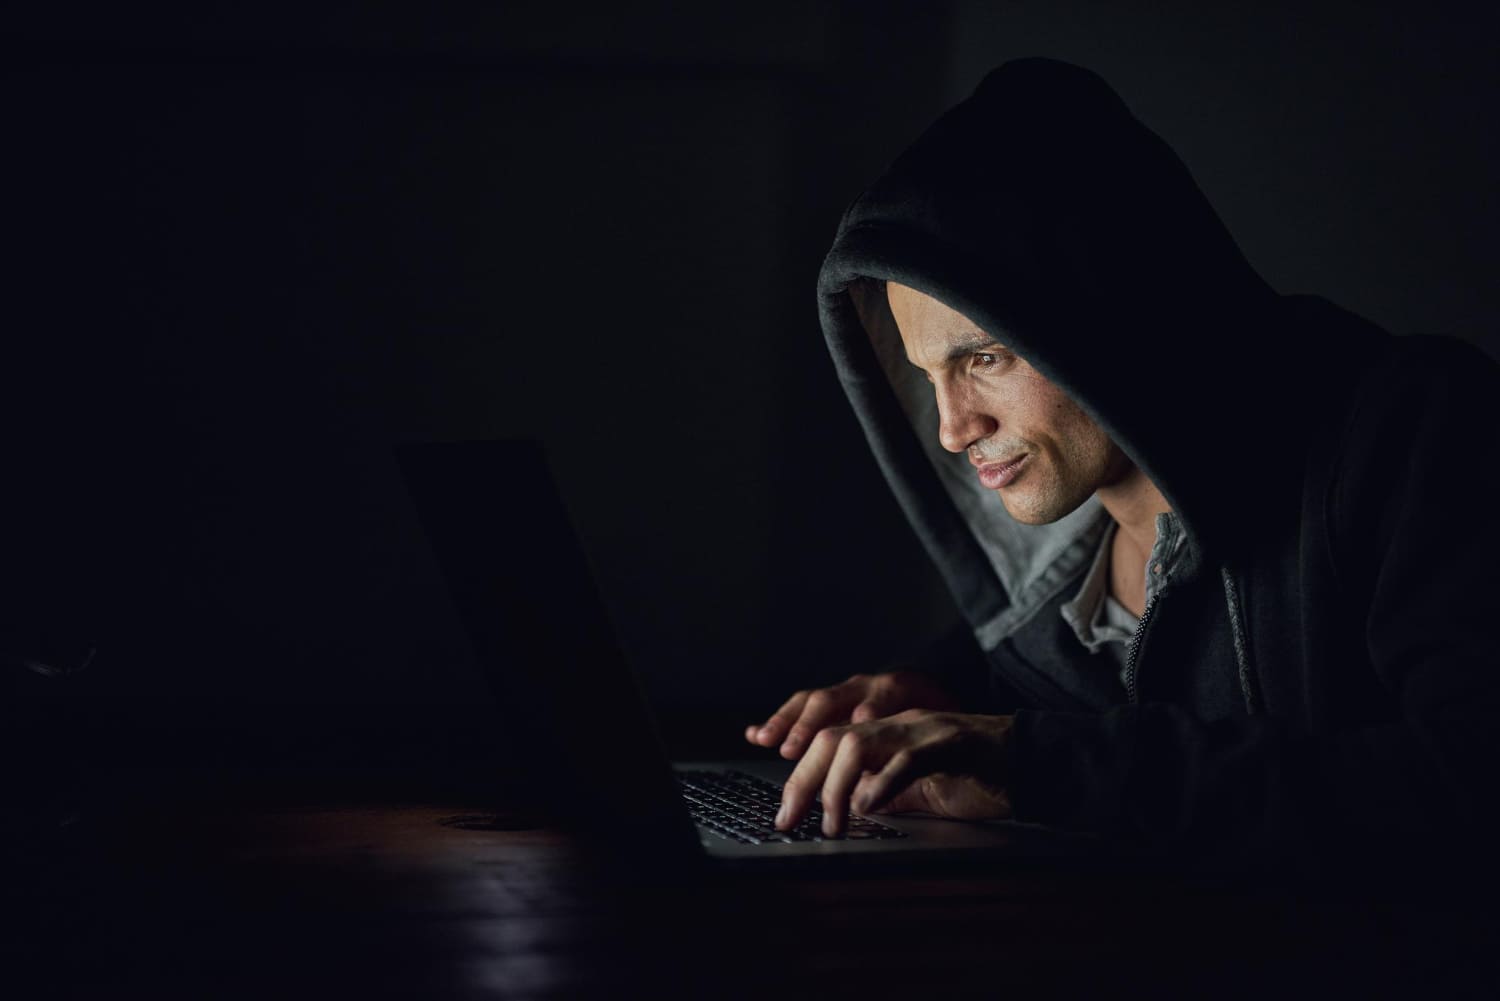 How to Protect Yourself From Online Stalking